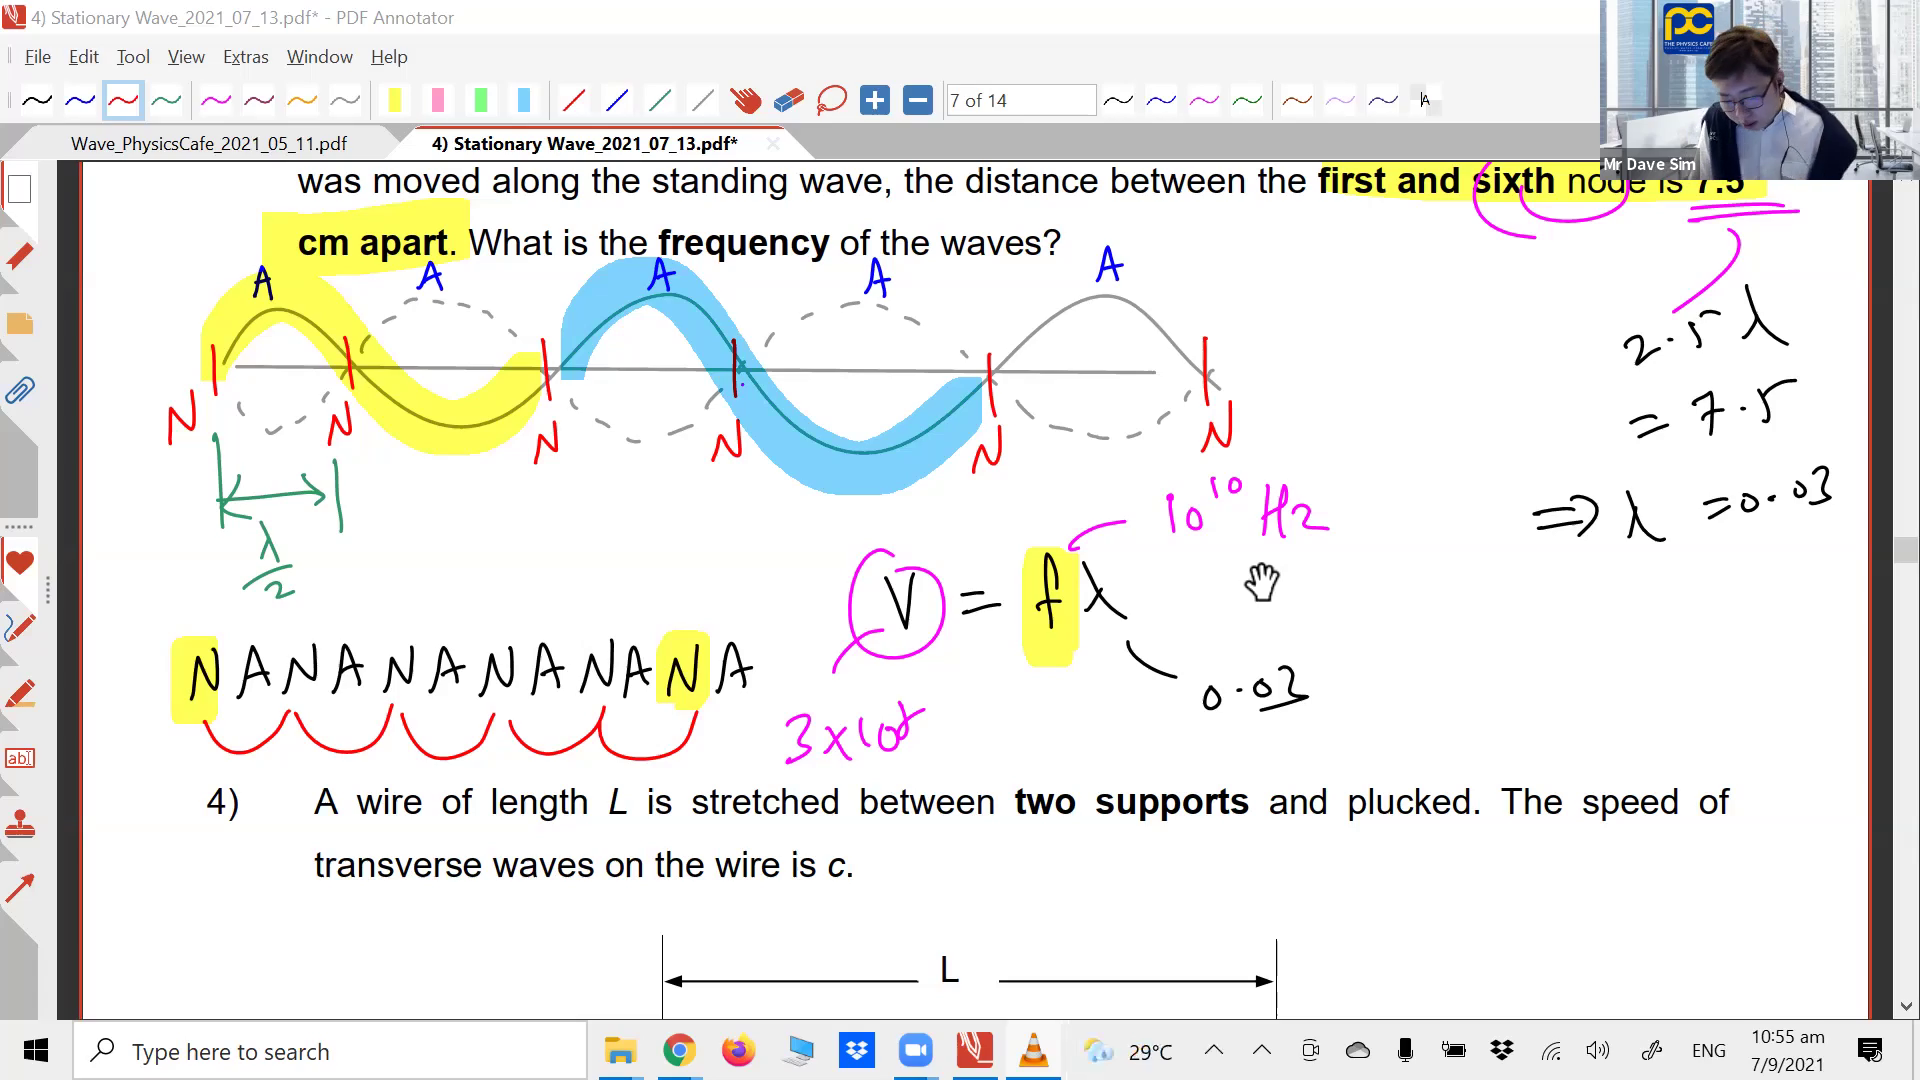 [SUPERPOSITION] Stationary Waves